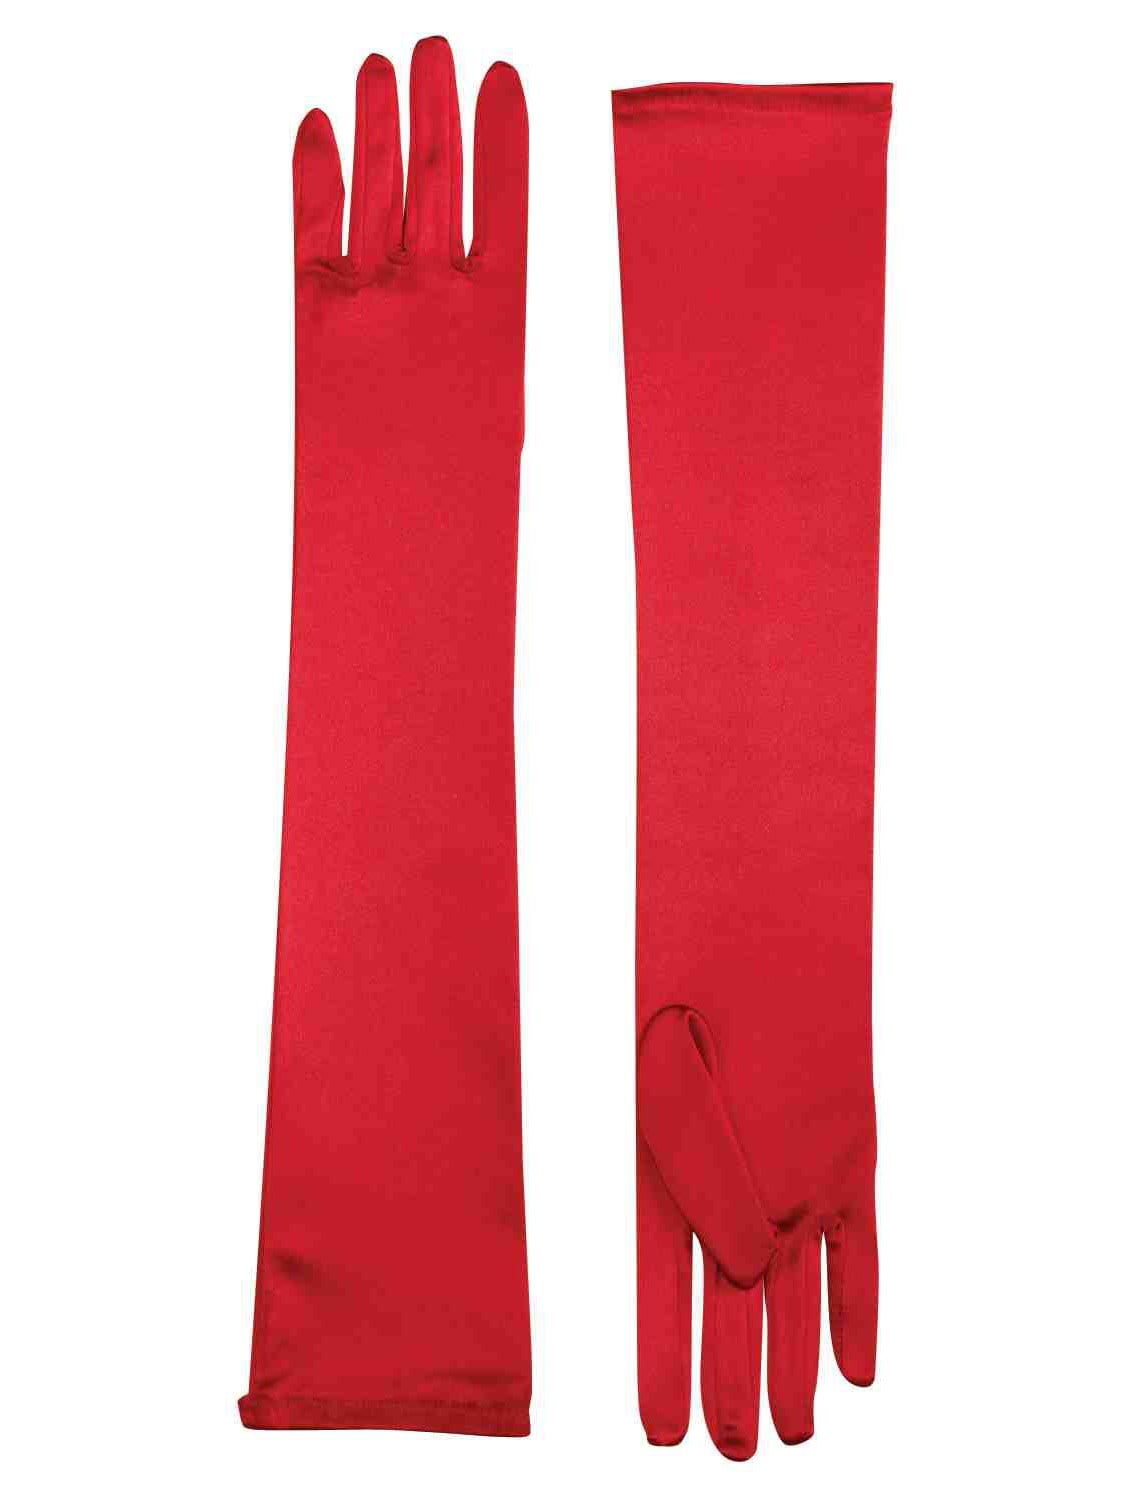 Extra Long Adult Women's One Size Red Satin Opera Gloves Leg Avenue 16B 